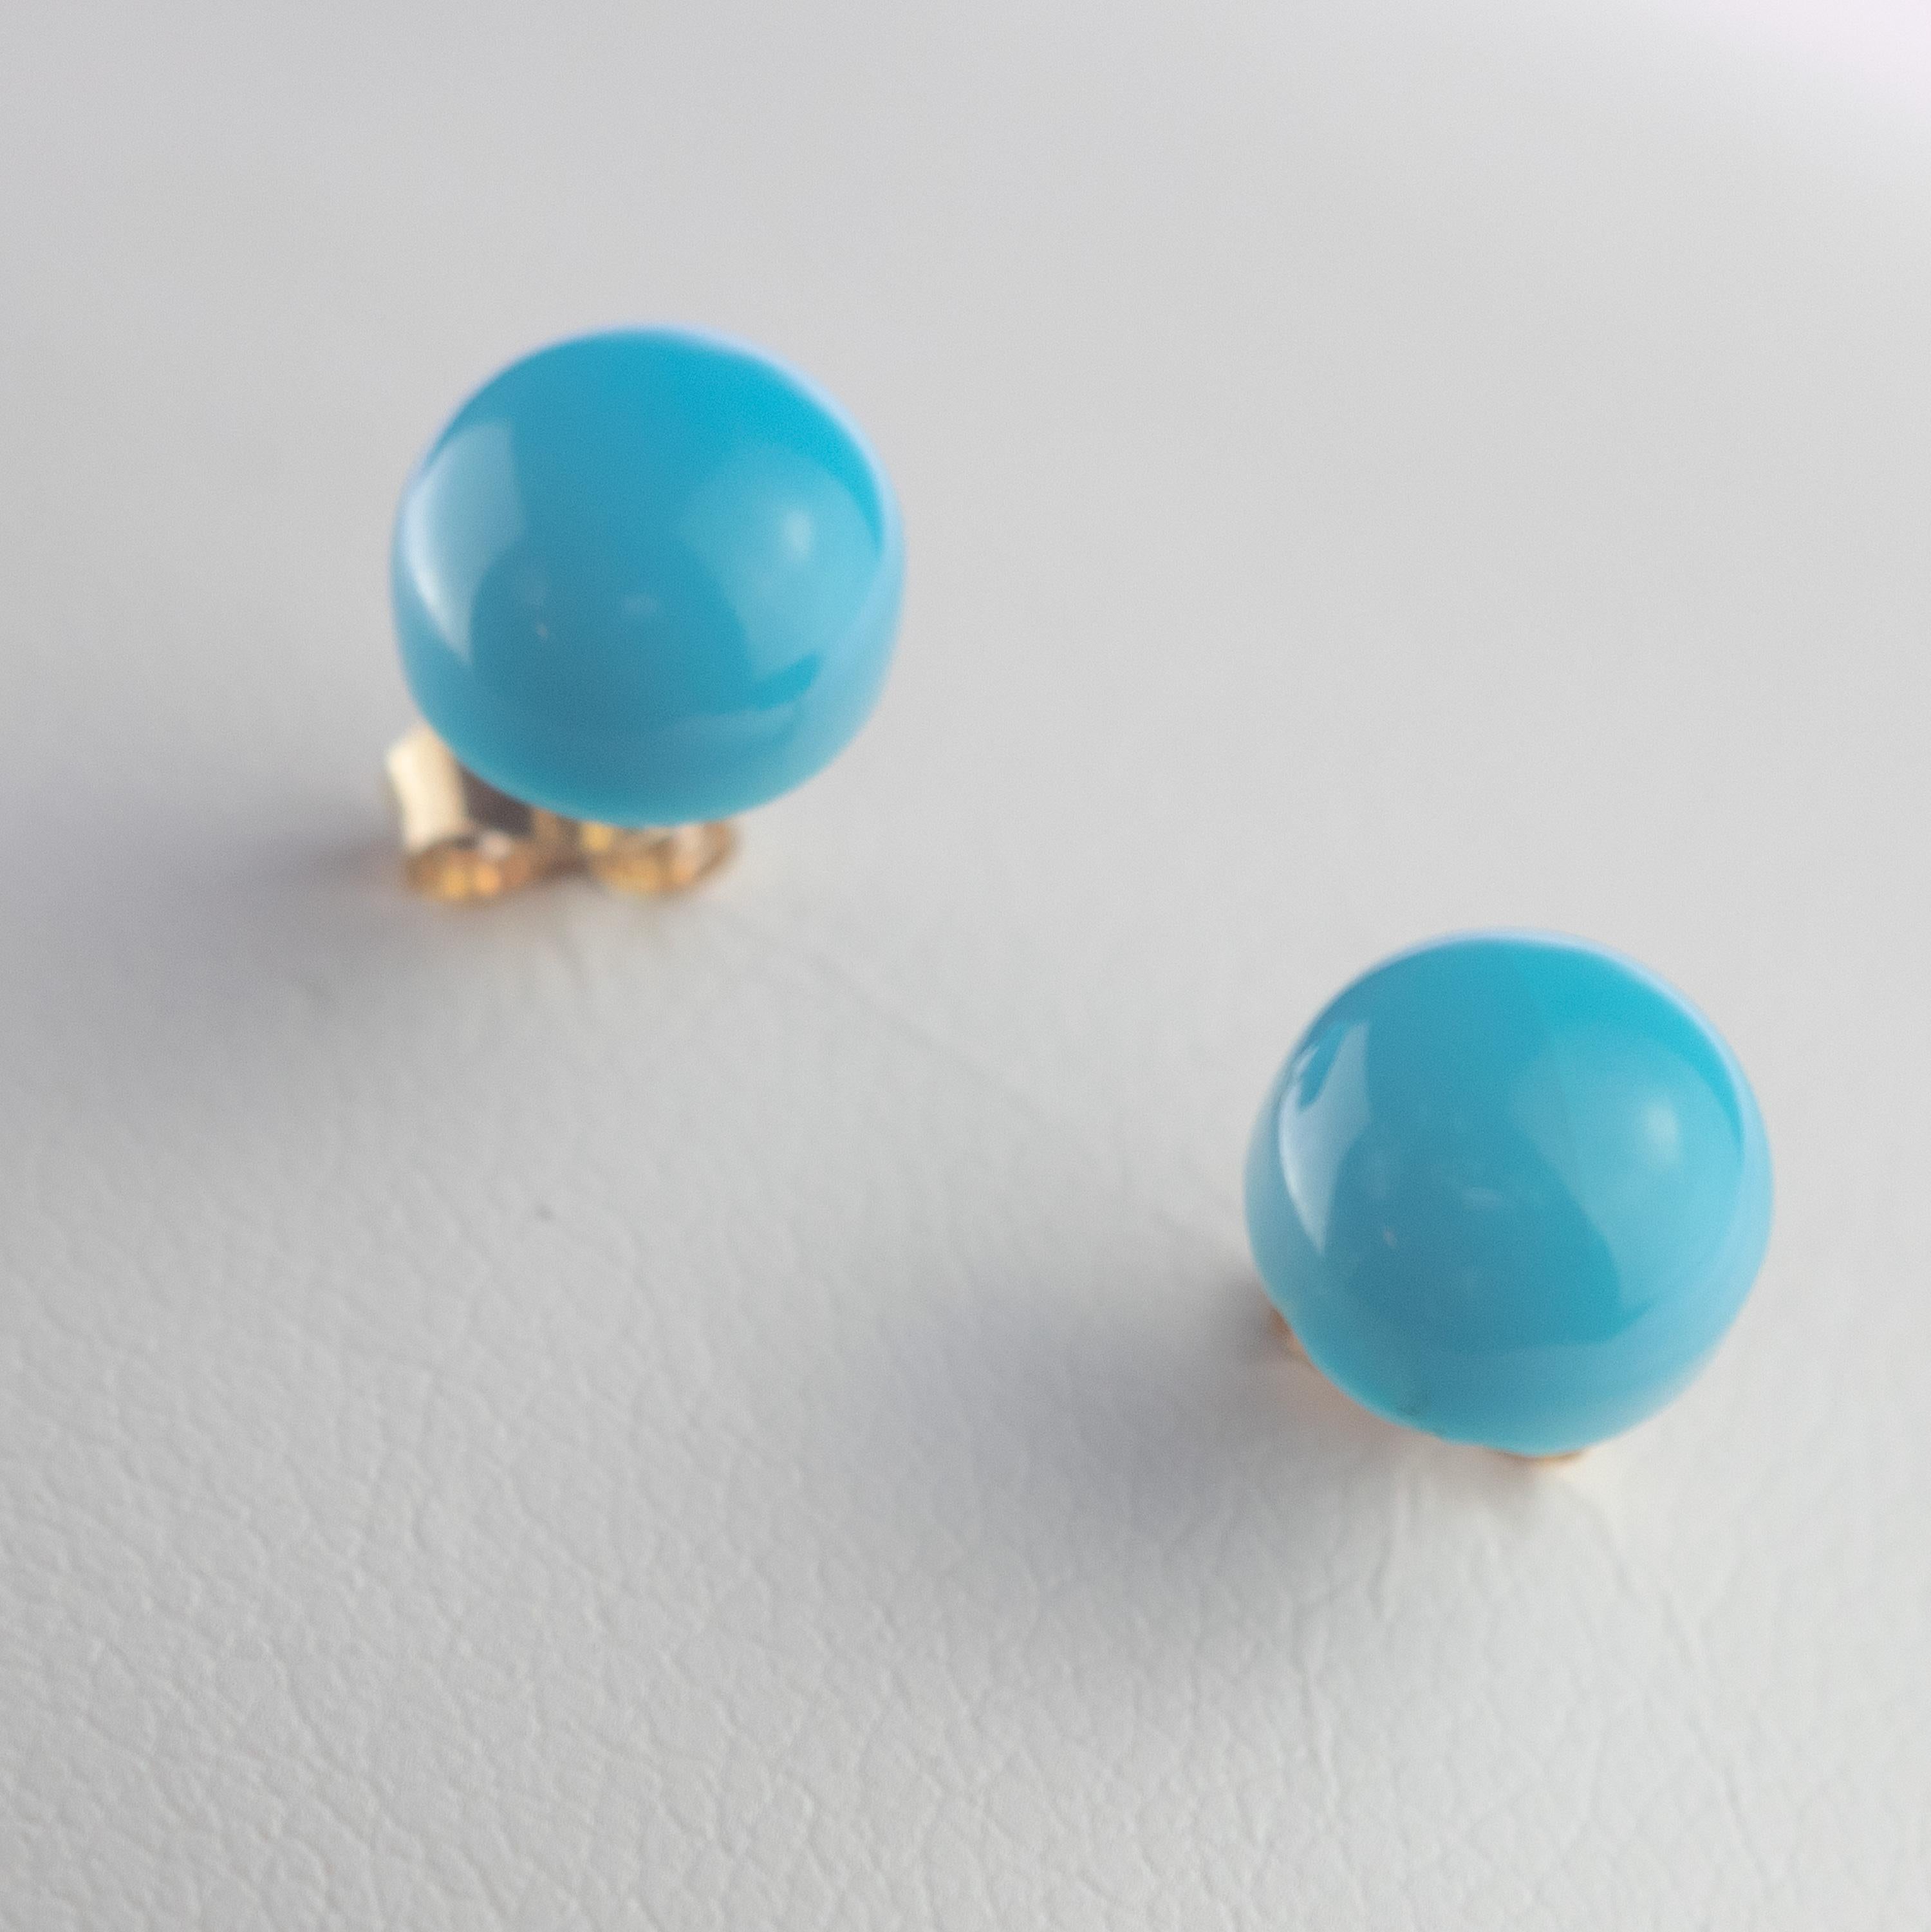 Round Cut Natural Turquoise Round Cabochon 9 Karat Gold Stud Chic Cocktail Earrings For Sale